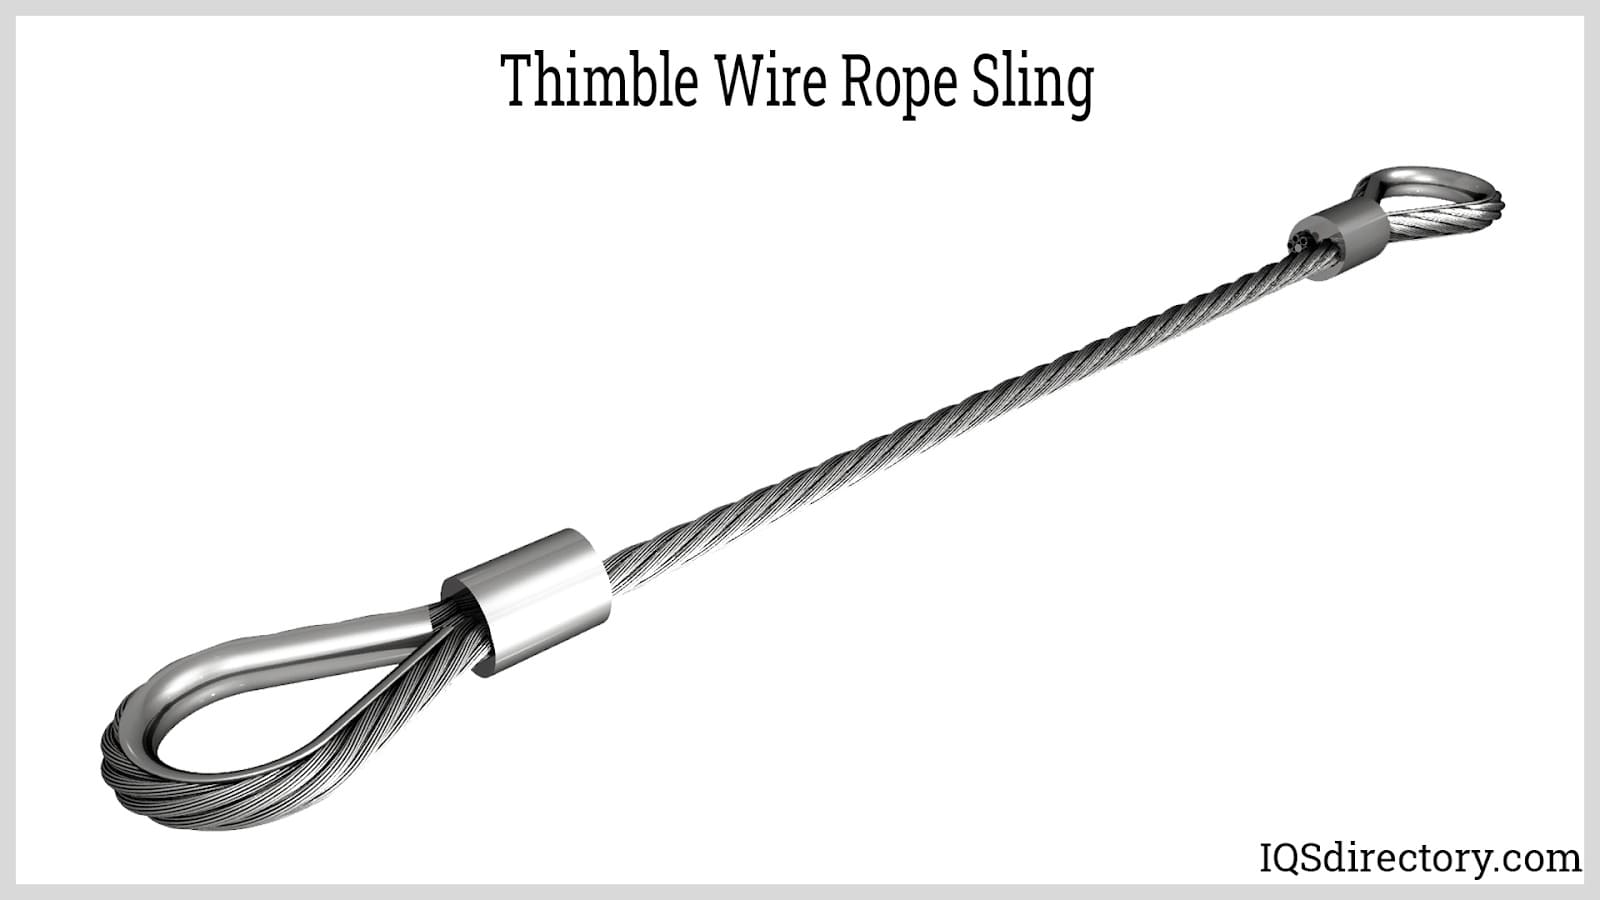 Thimble Wire Rope Sling